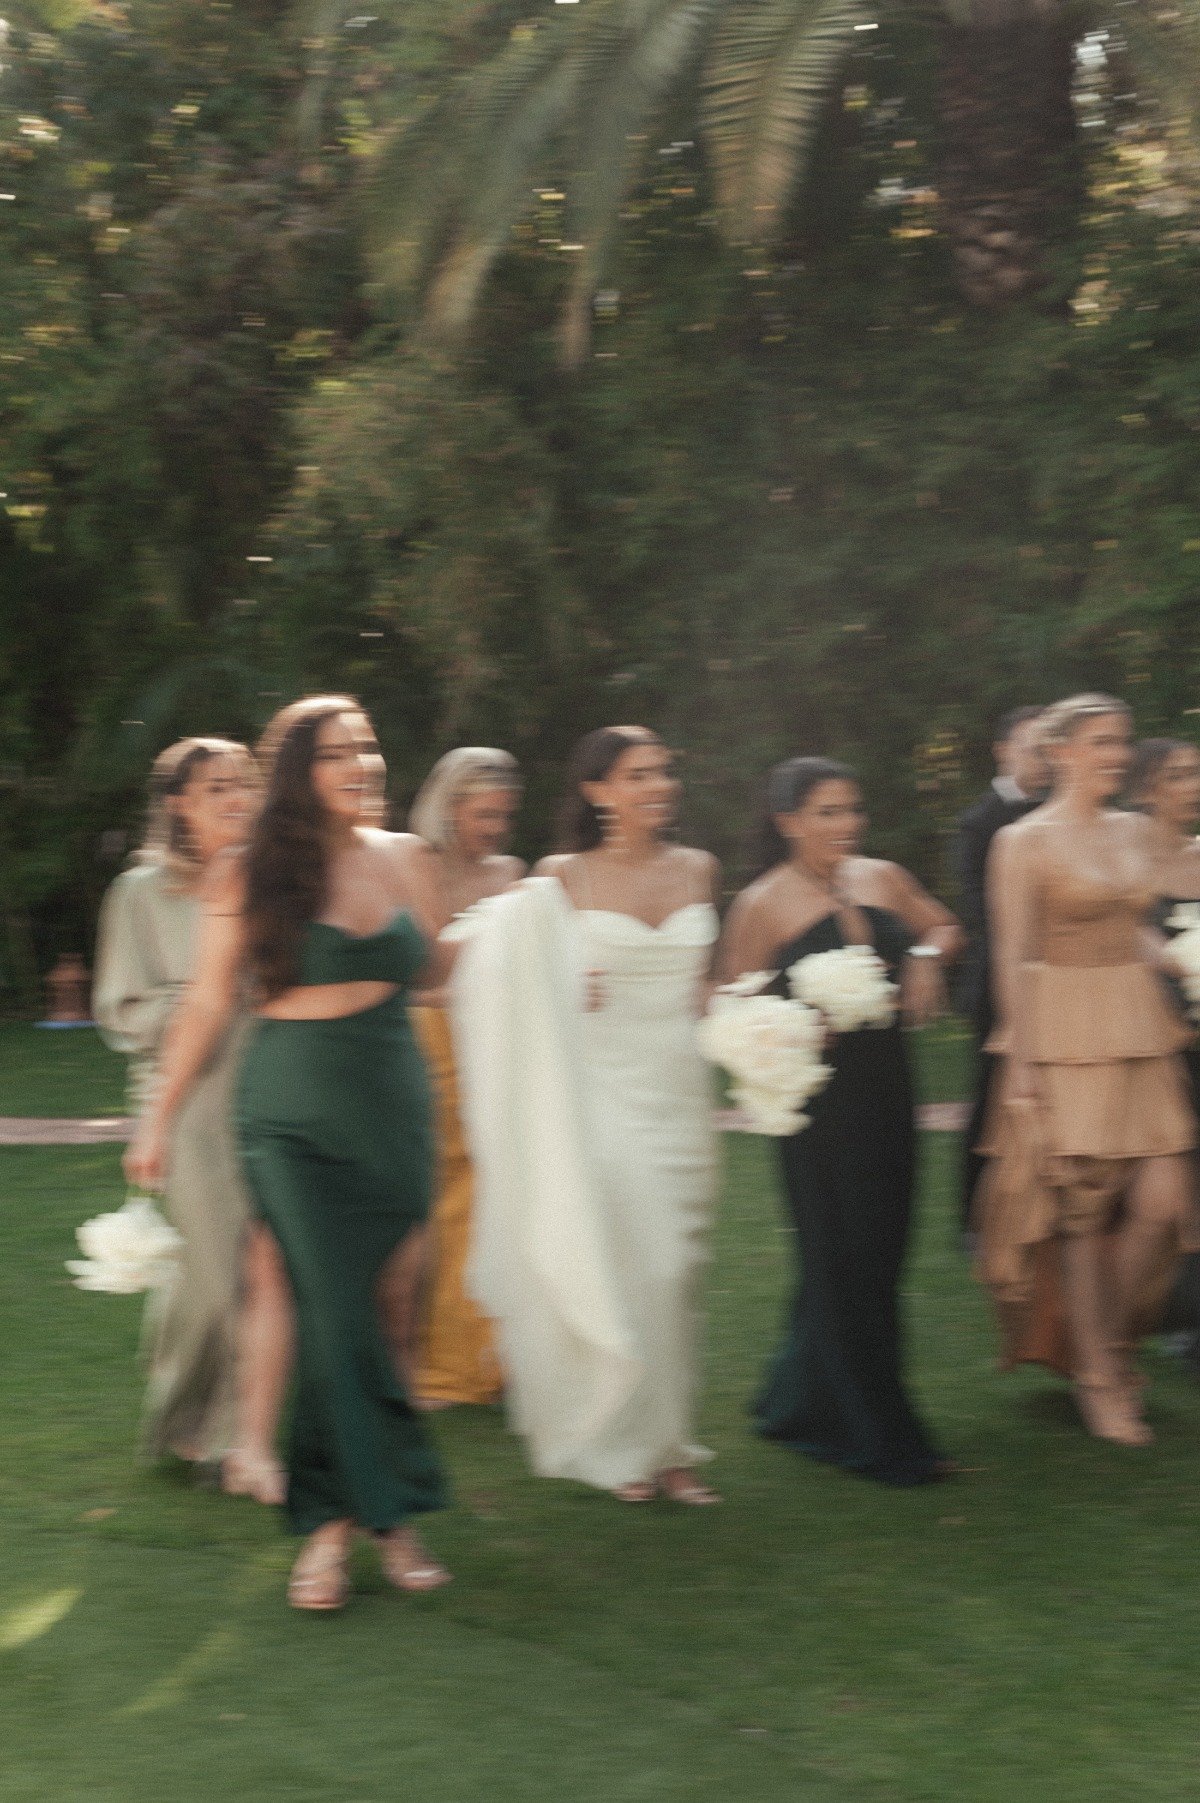 Bride and bridesmaids walking on grass